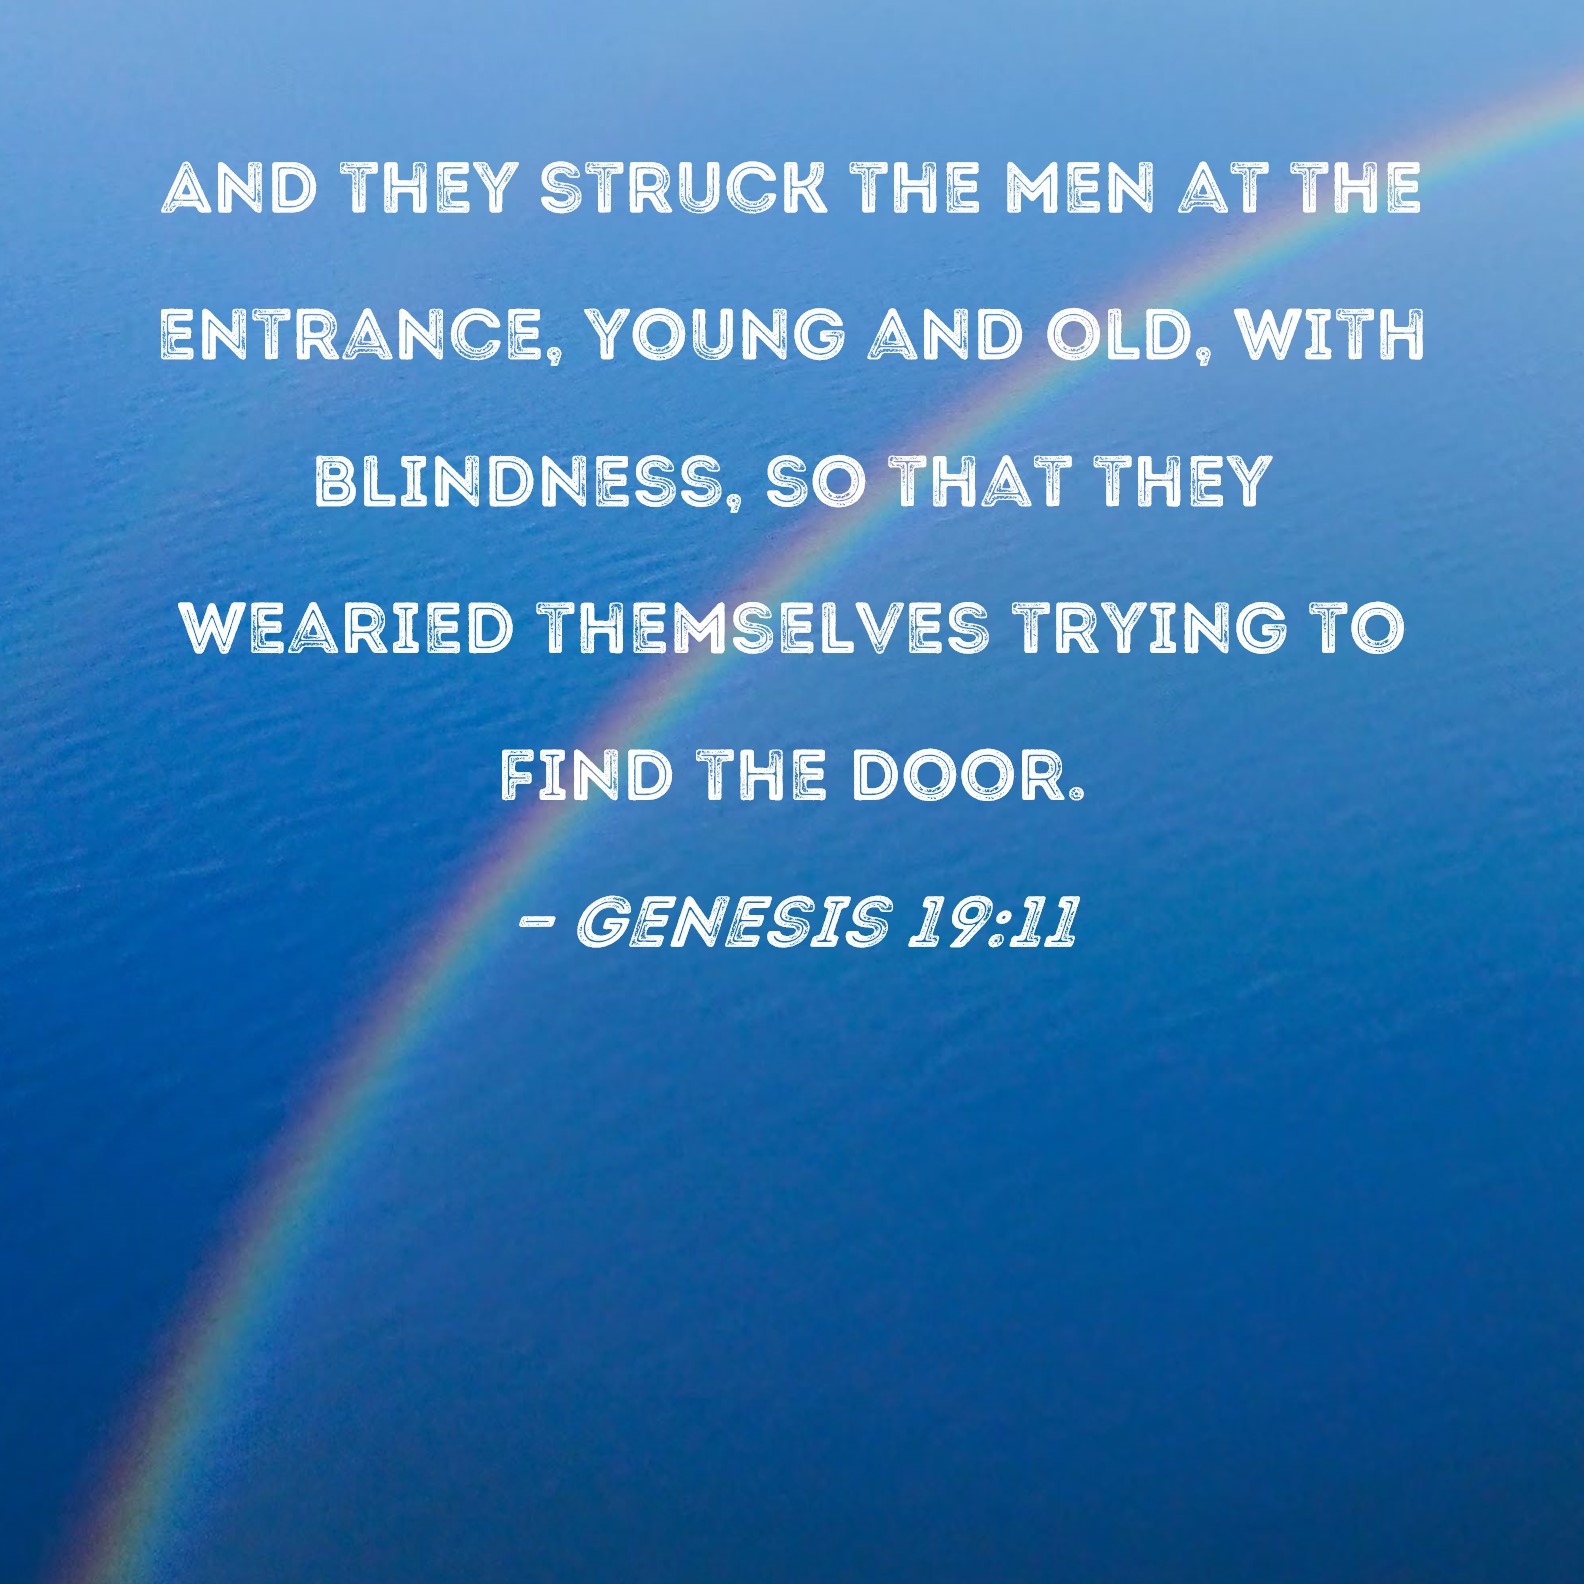 Genesis 1911 And they struck the men at the entrance, young and old